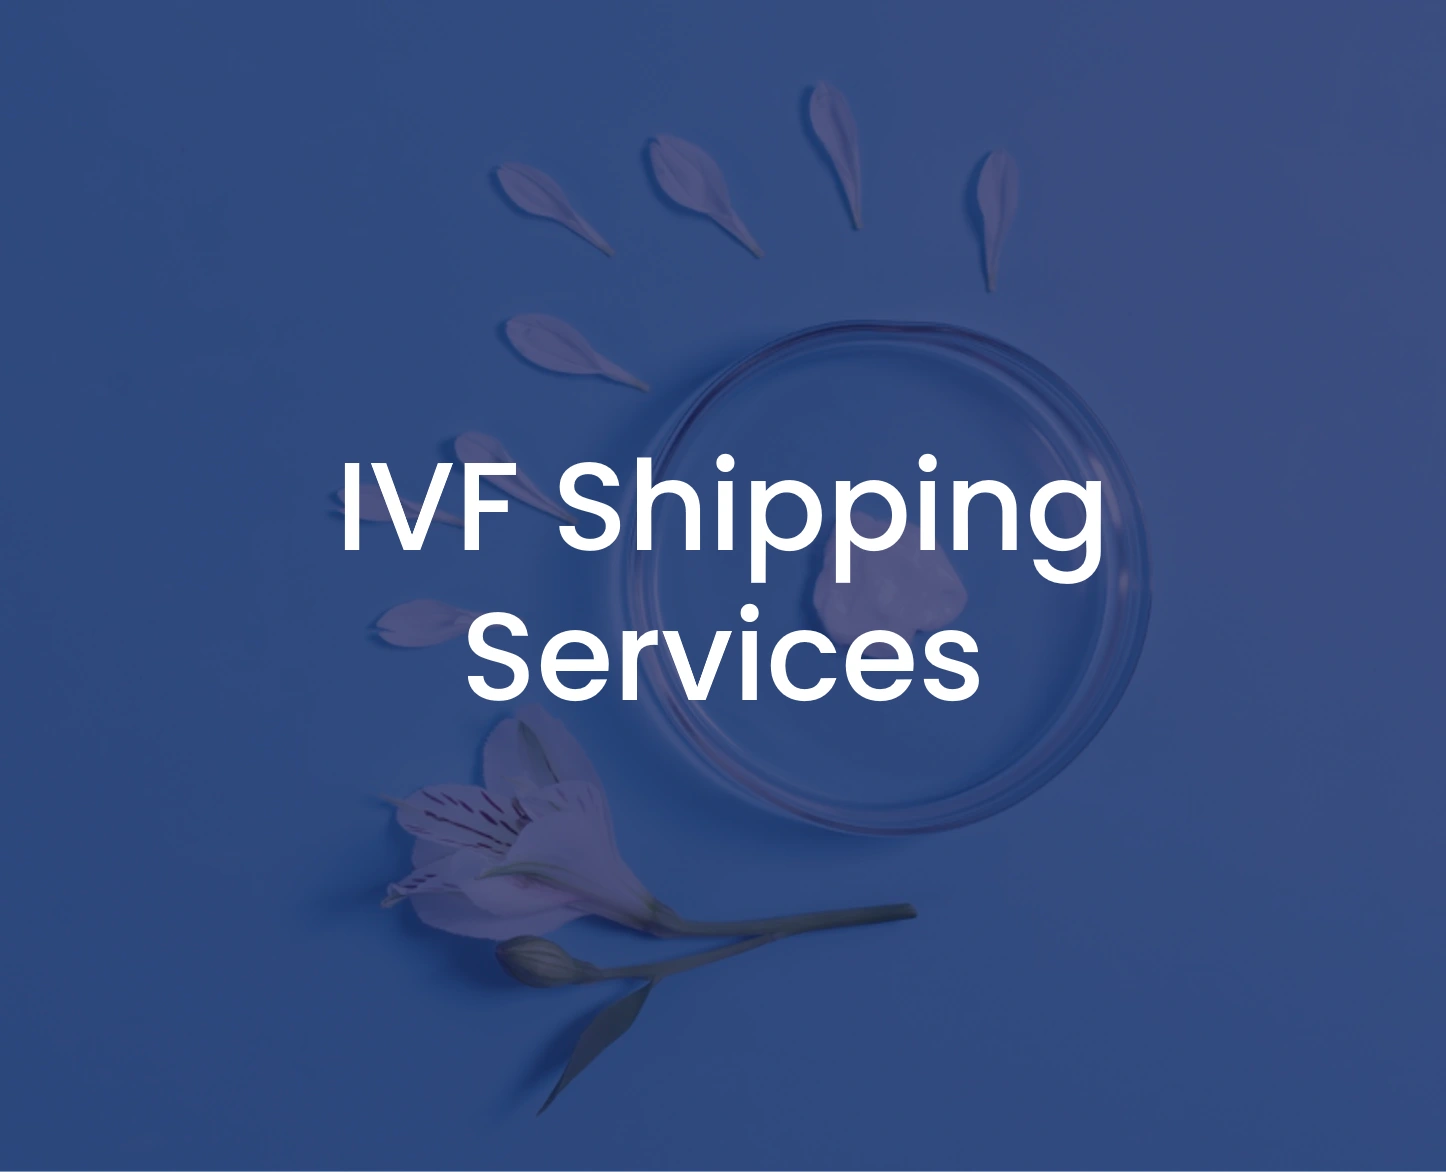 IVF Shipping Services